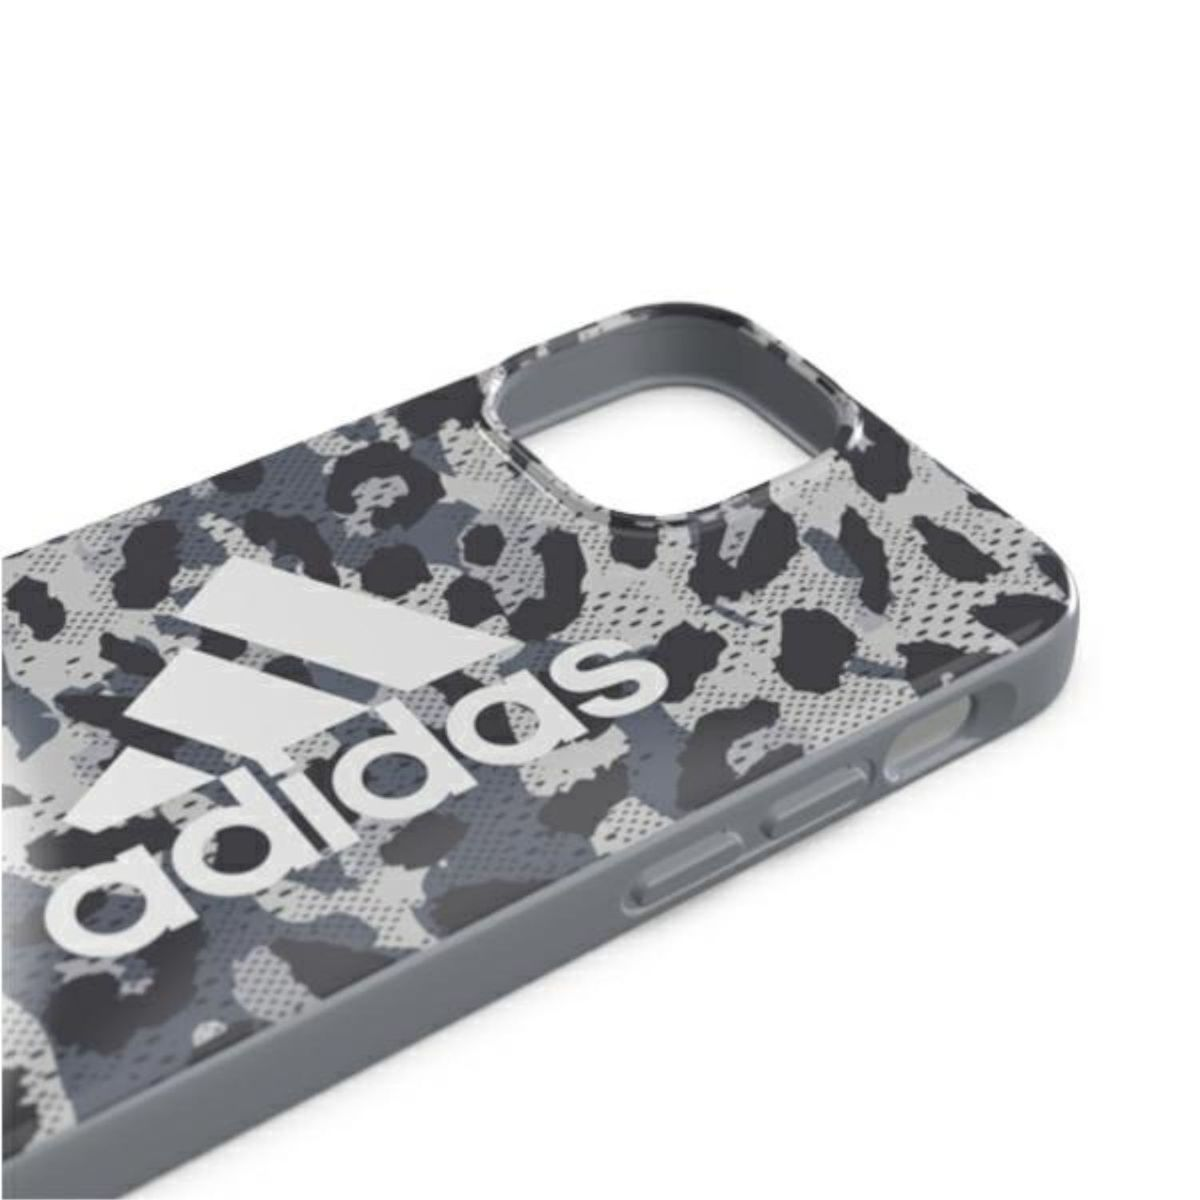 Apple, Grau Cover, Hülle Backcover, iPhone Collection 13 ADIDAS Snap Leopard Mini,